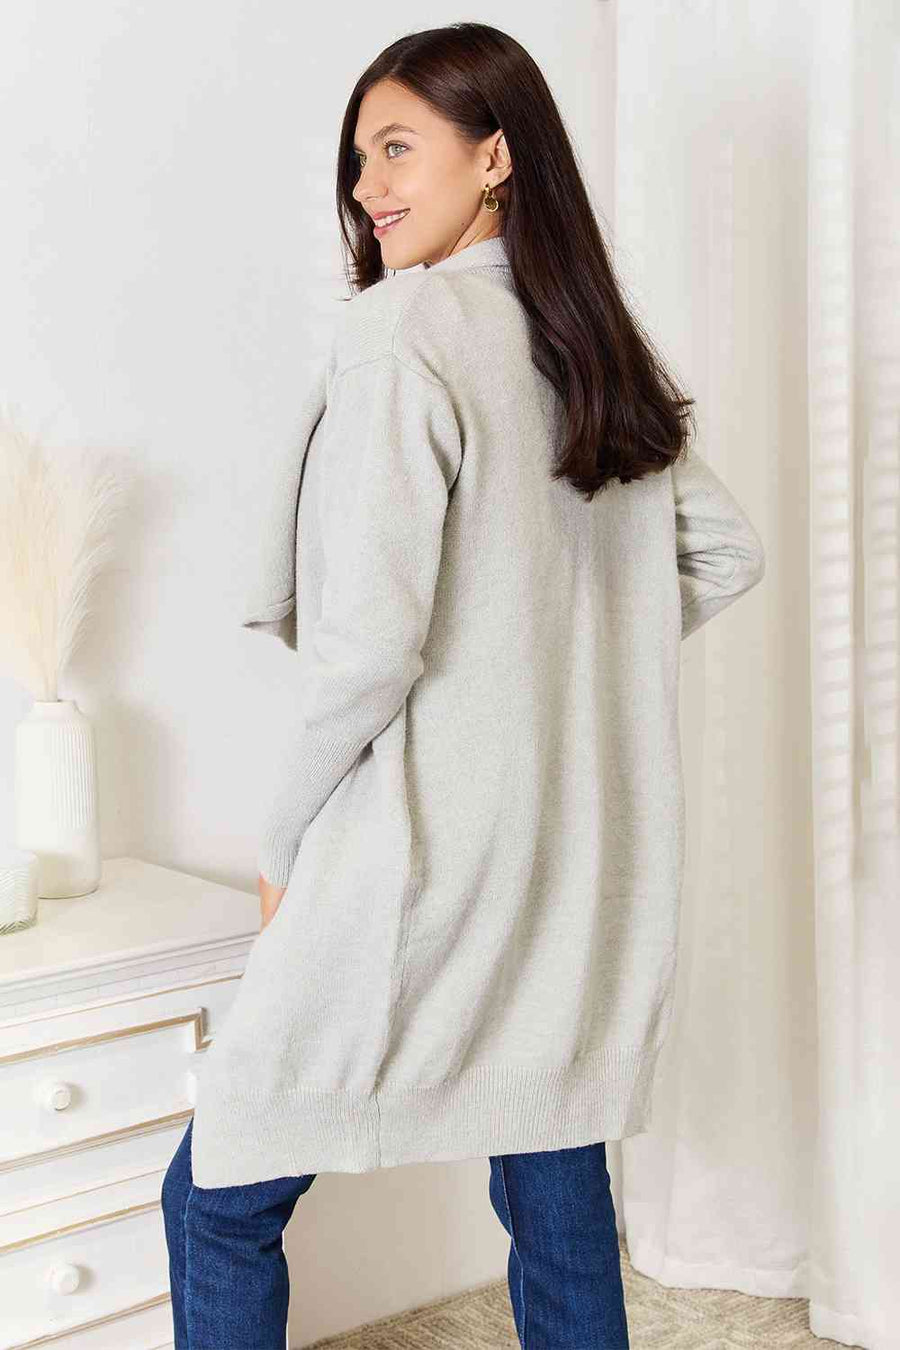 Double Take Open Front Duster Cardigan with Pockets-Trendsi-Light Gray-S-SatinBoutique